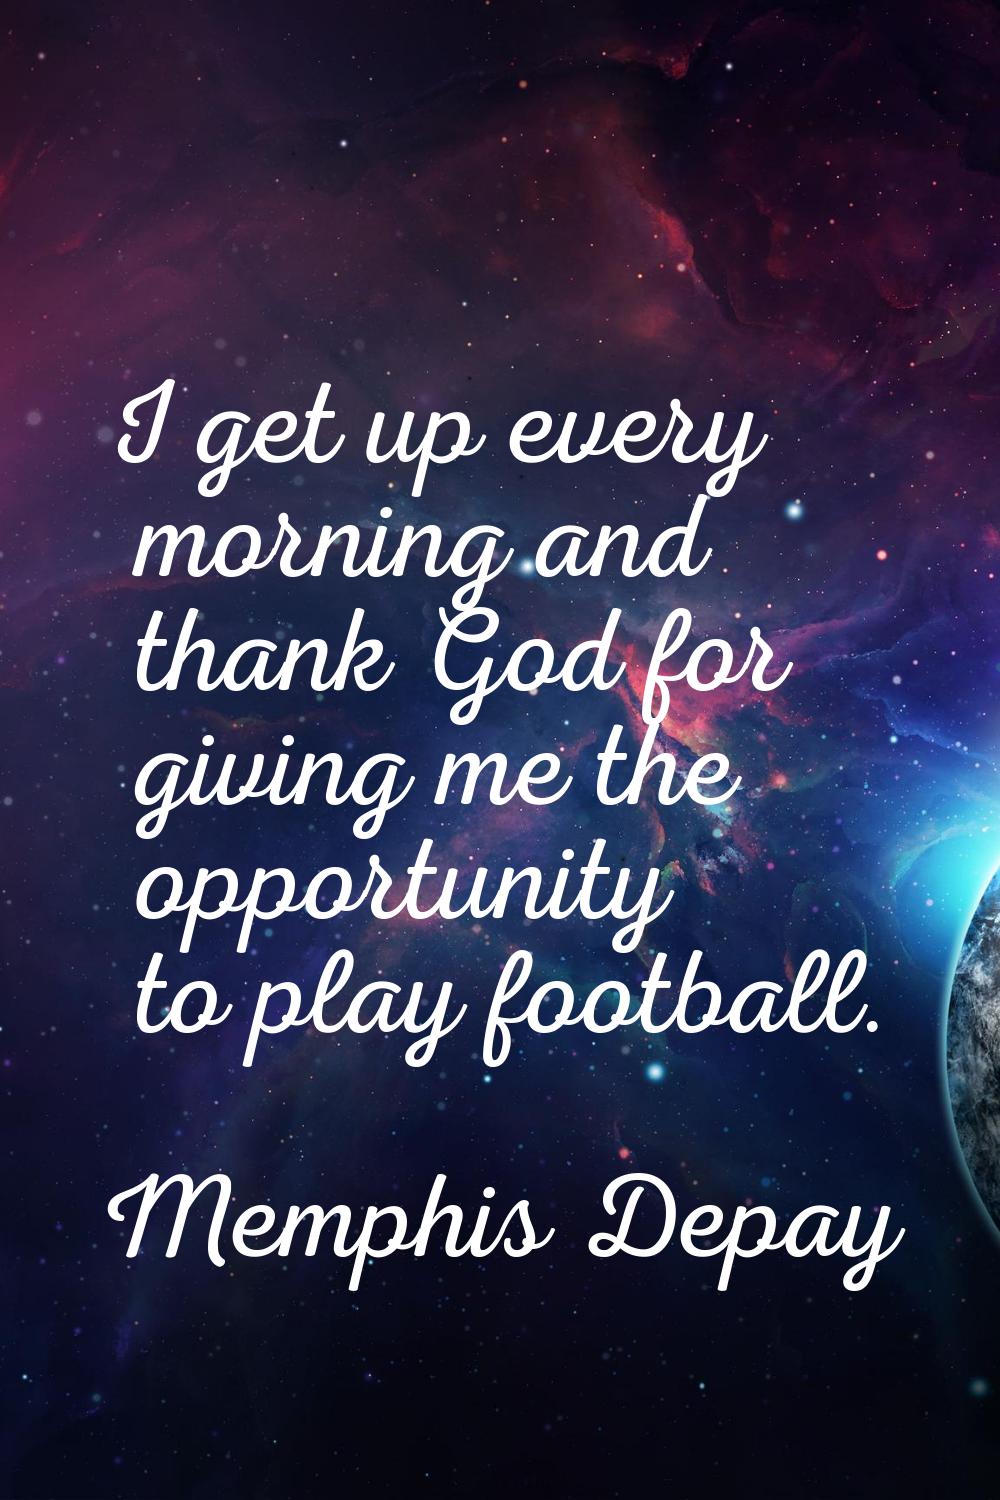 I get up every morning and thank God for giving me the opportunity to play football.